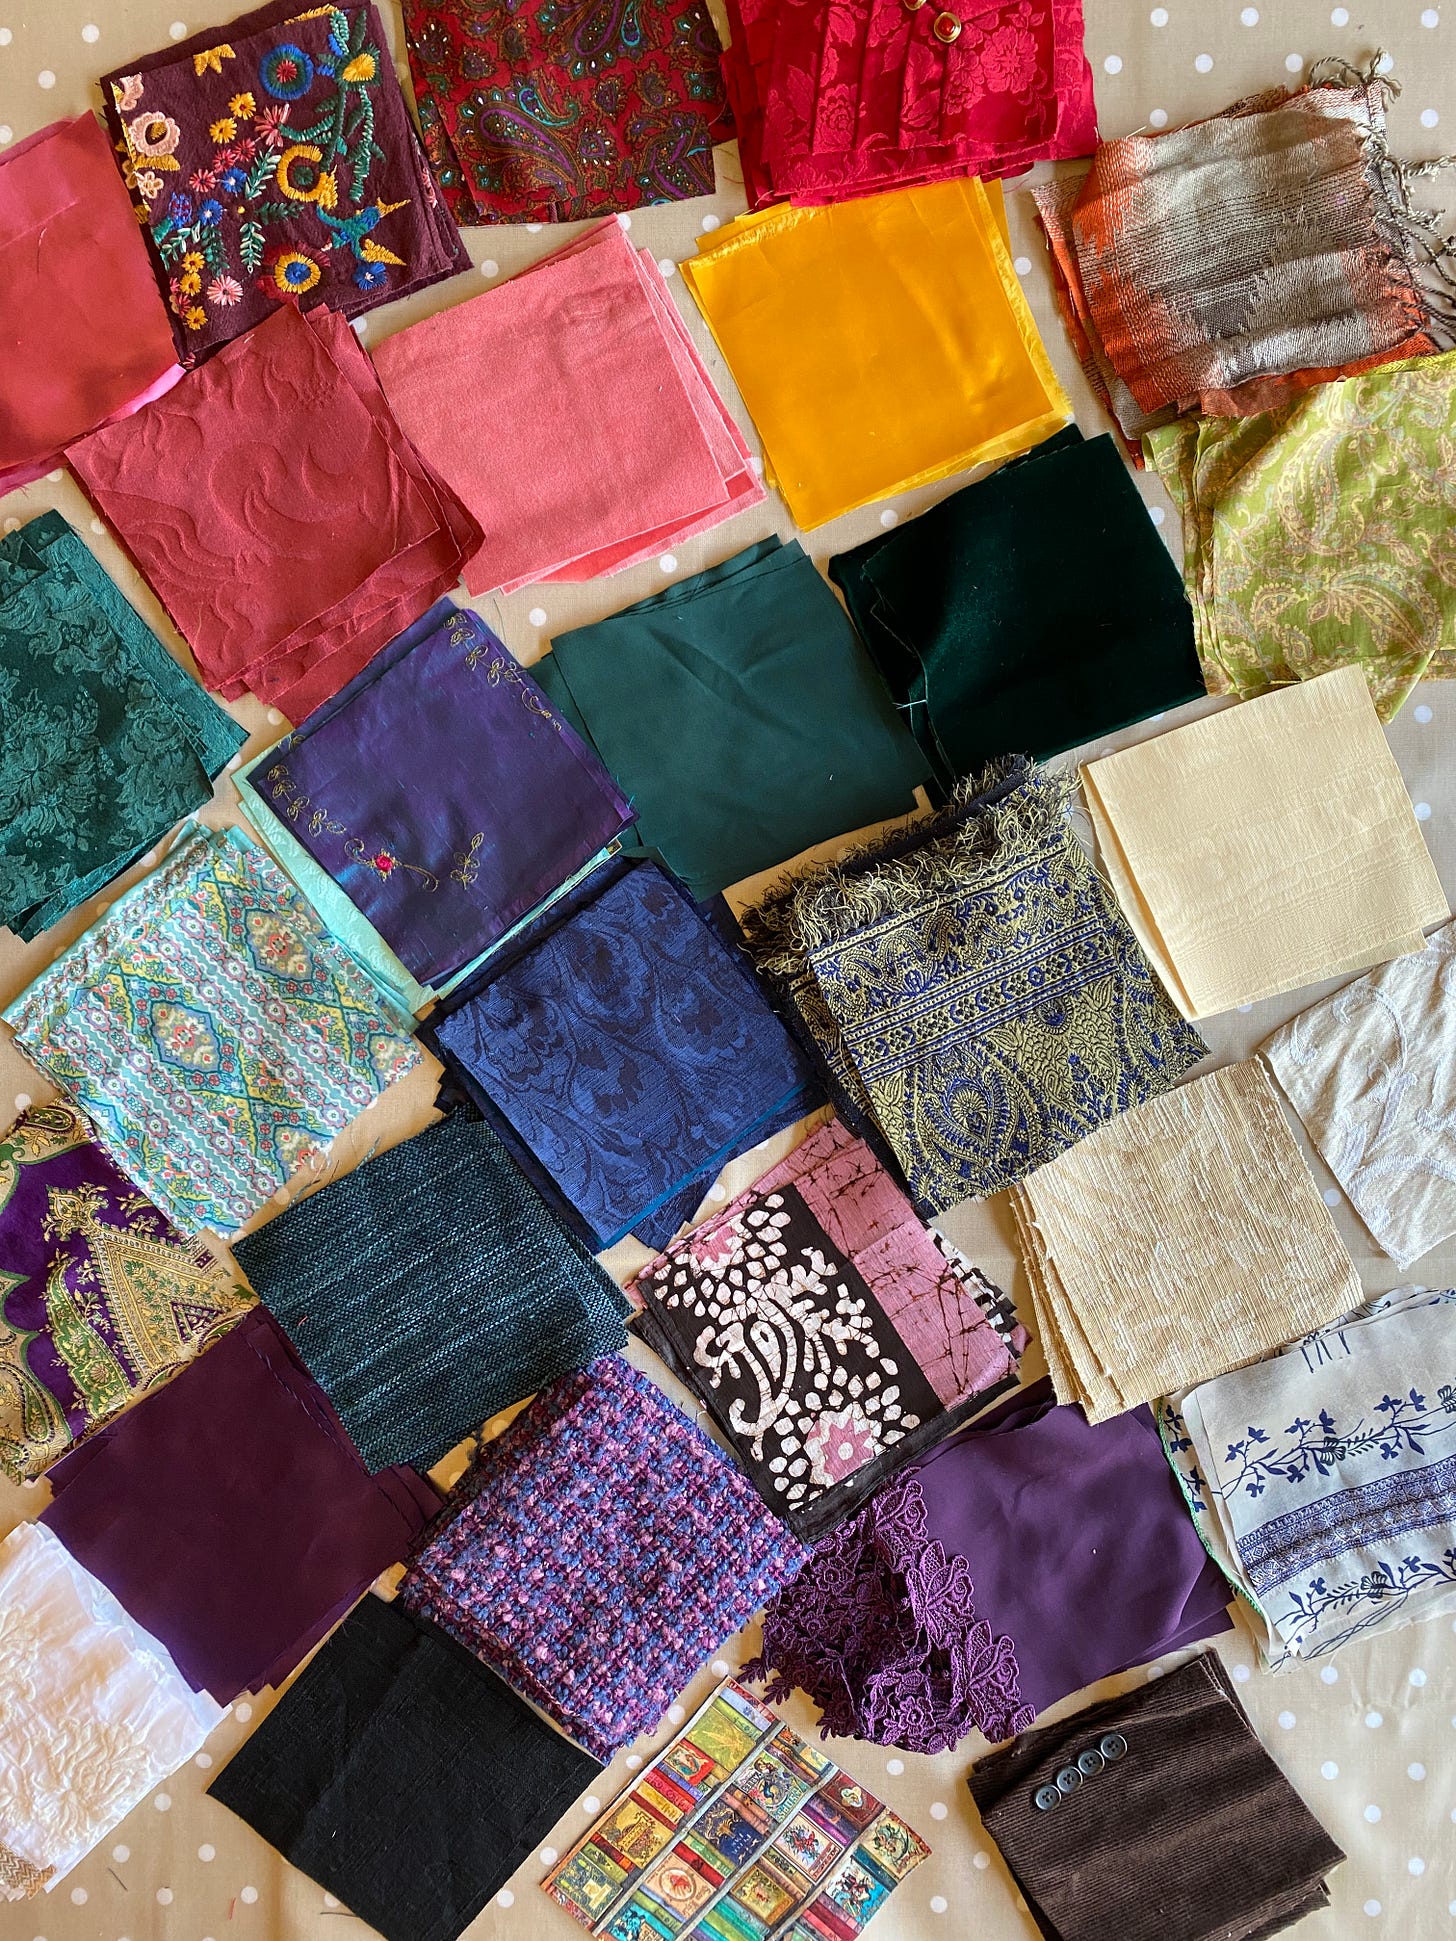 Piles of 209 square patches sorted by colors: red, gold, yellow, blue, green, purple, white, brown, black. There are also various textures: velvets, brocade, silk, corduroy, satin, batik, embroidered, and a red pleated satin with a row of red and gold buttons.